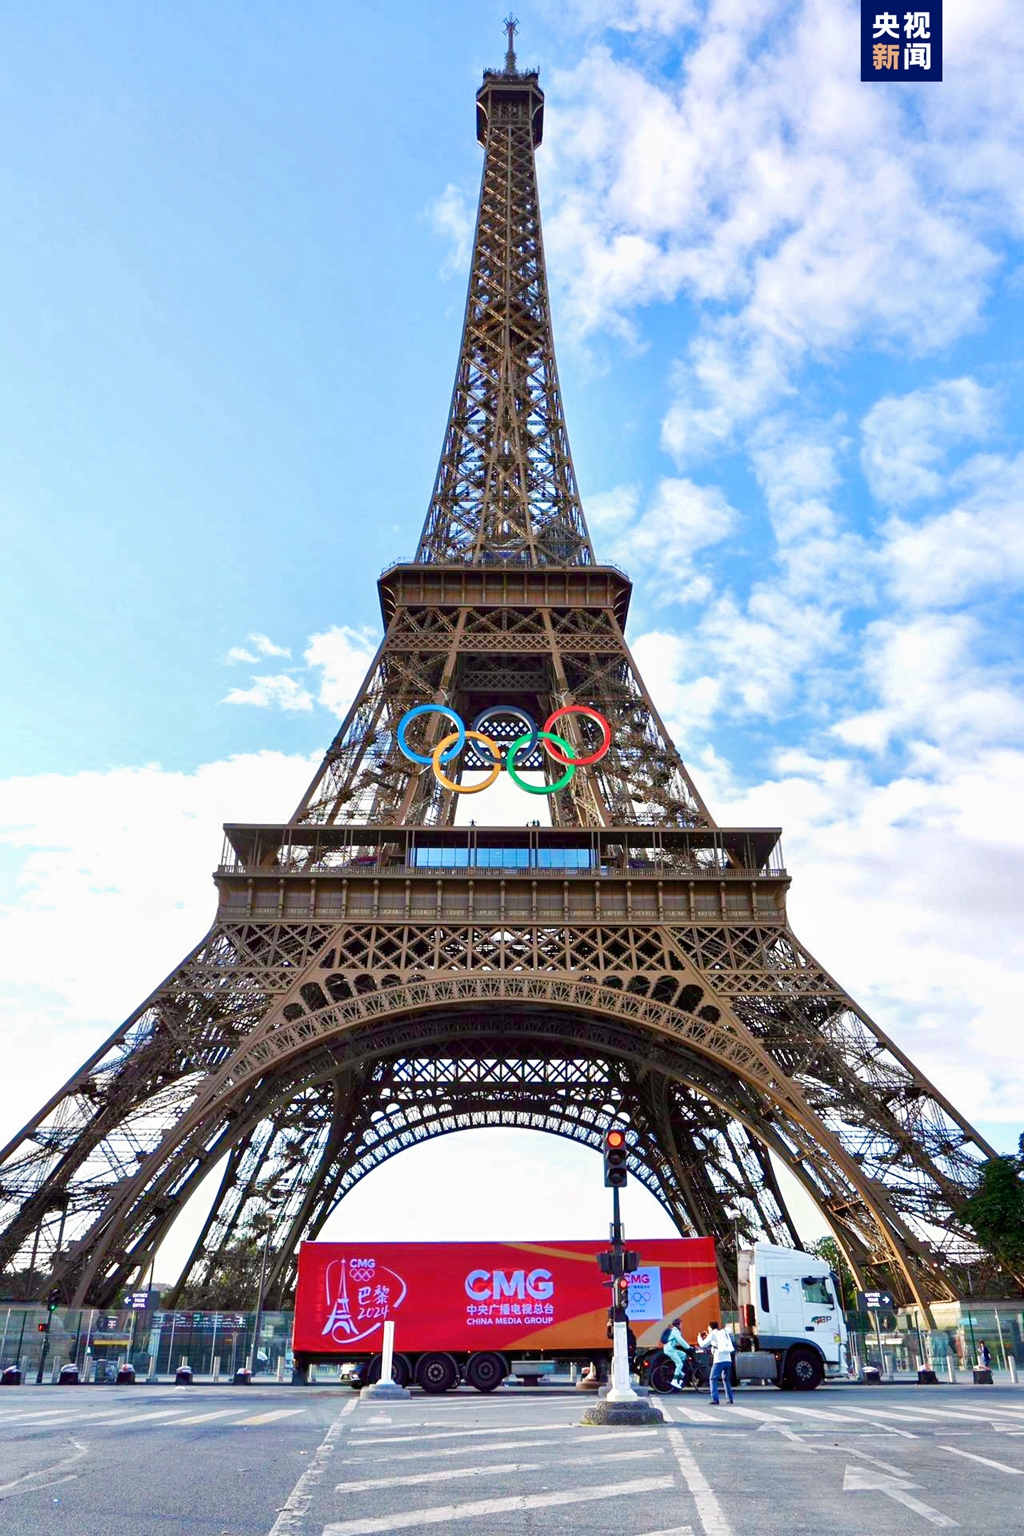 CMG's 8K UHD live broadcast van in front of the Eiffel Tower in Paris, France. /CMG